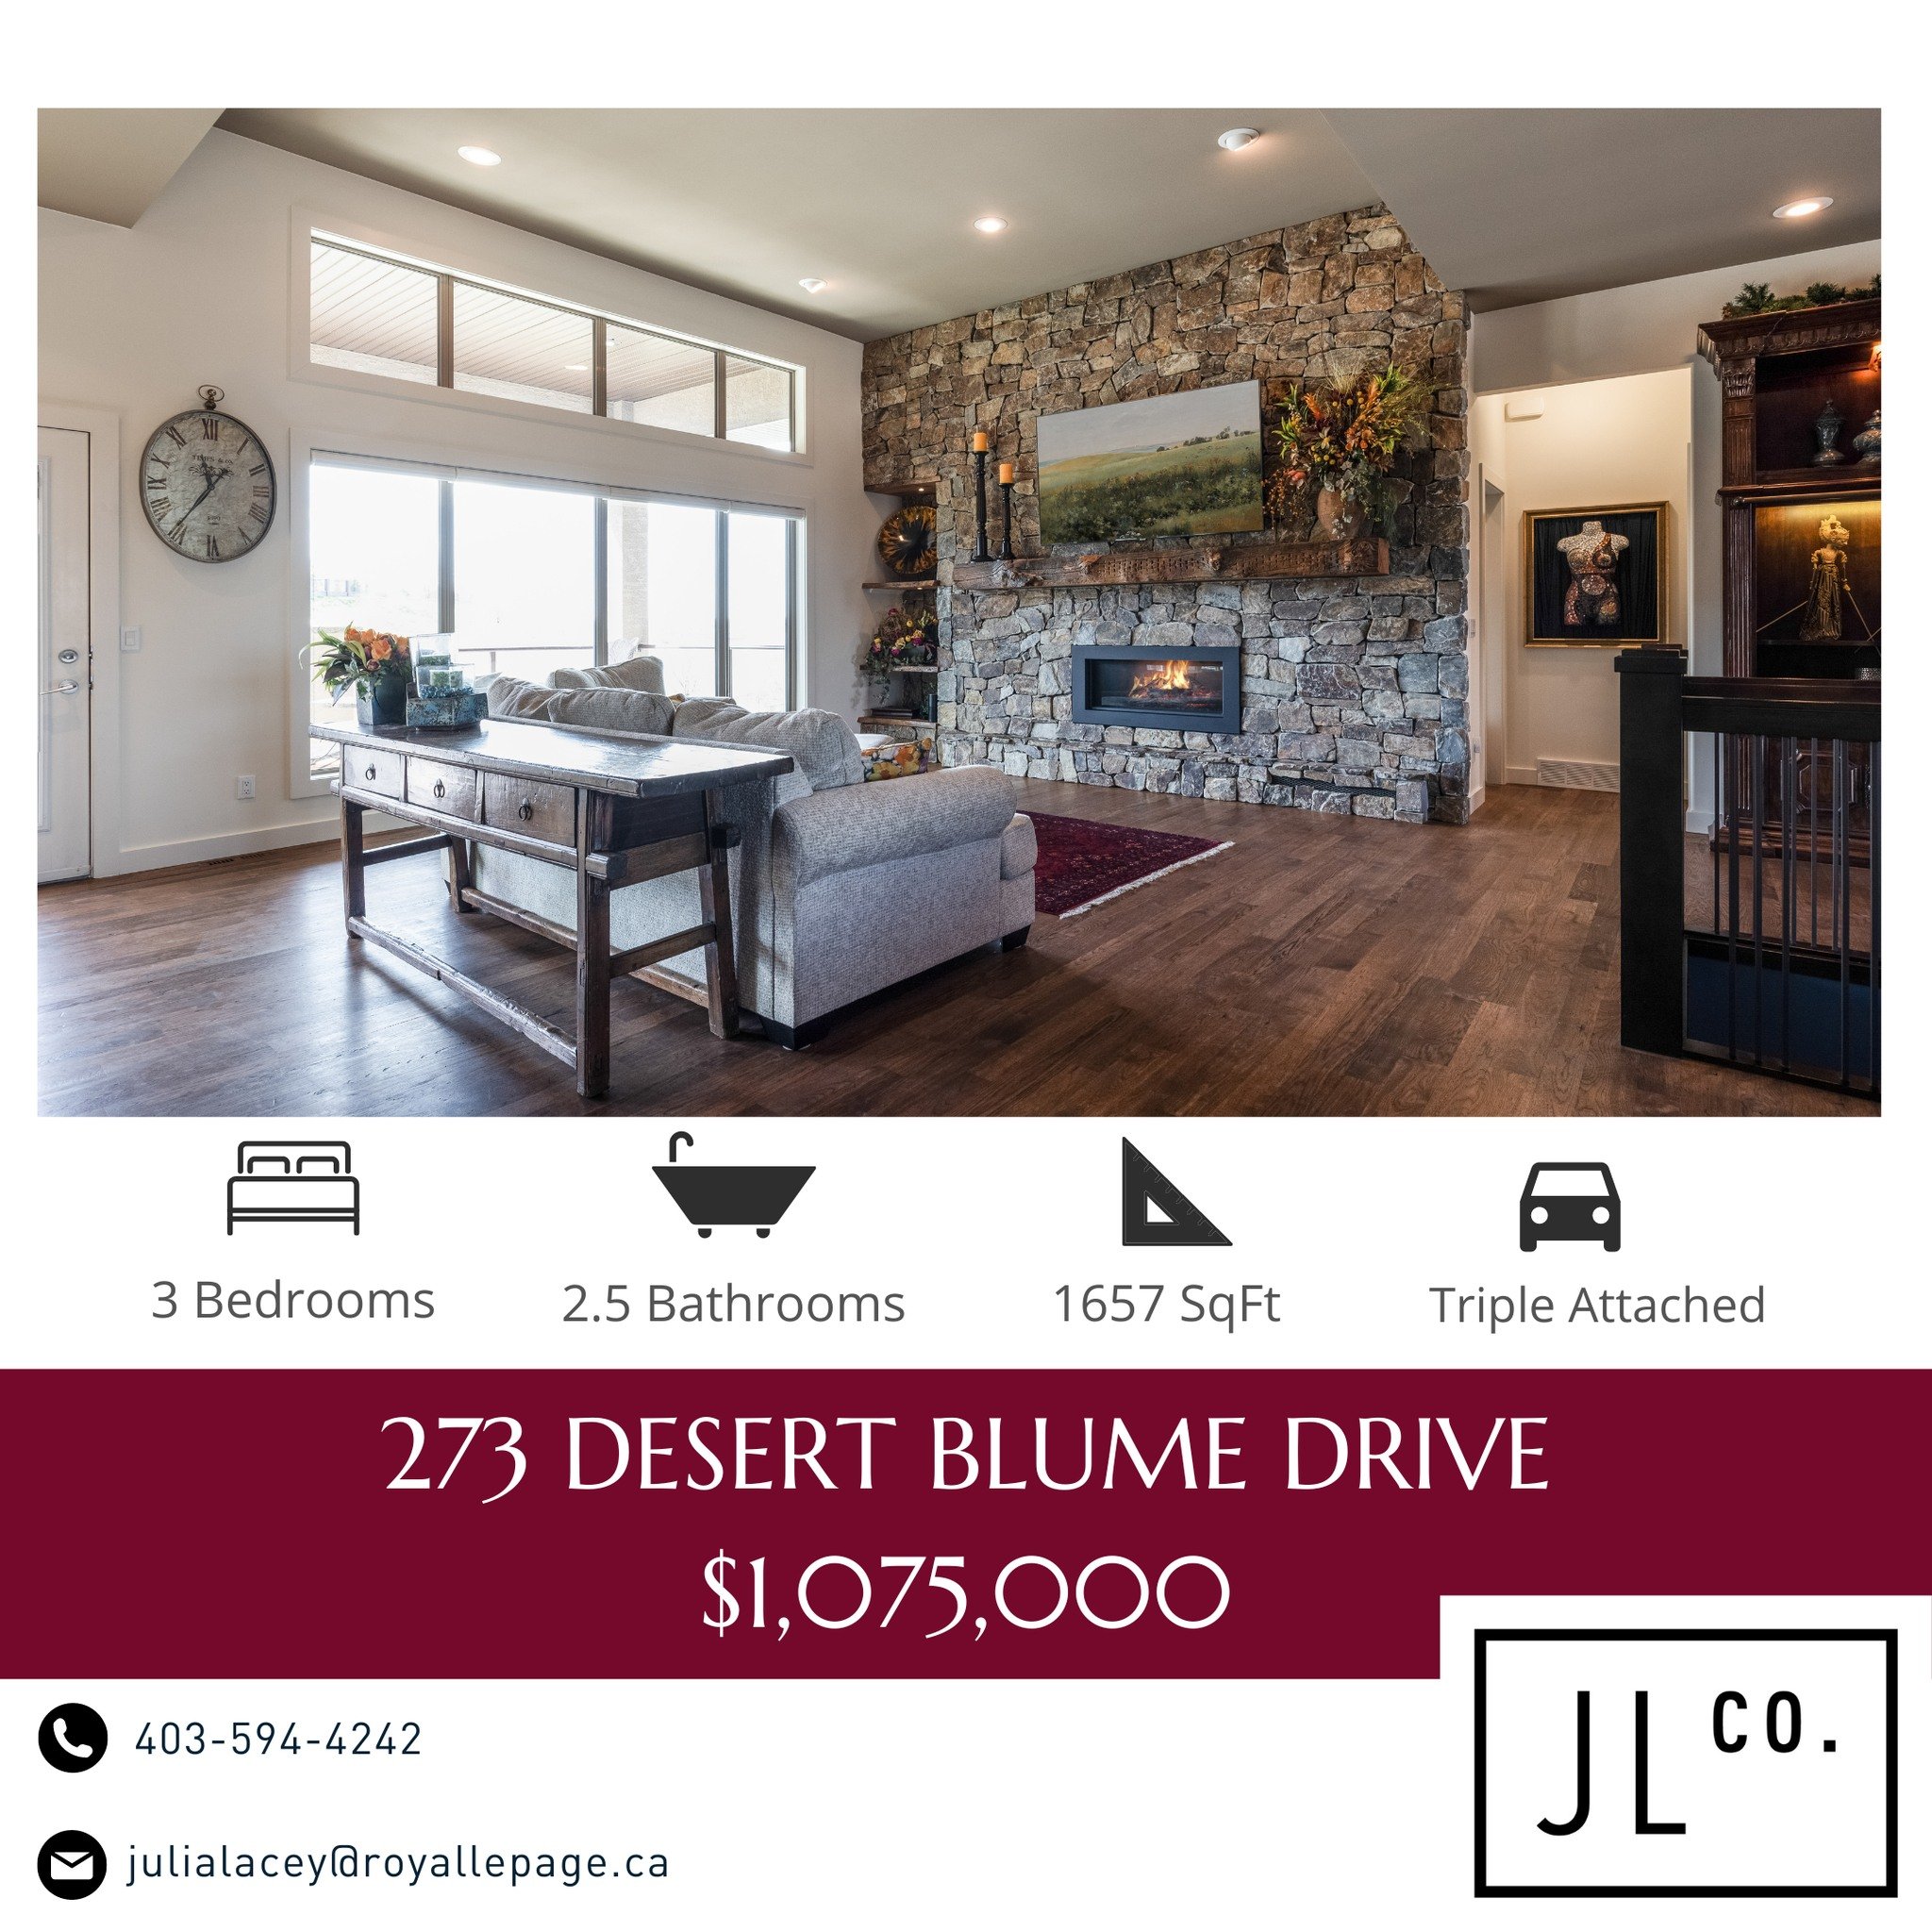 Fresh Listing For Spring: Luxurious living meets natural beauty in this stunning executive walkout bungalow nestled in Desert Blume. With its warm ambiance, spacious deck for evening gatherings, and views of the lush backyard and Desert Blume Golf Co